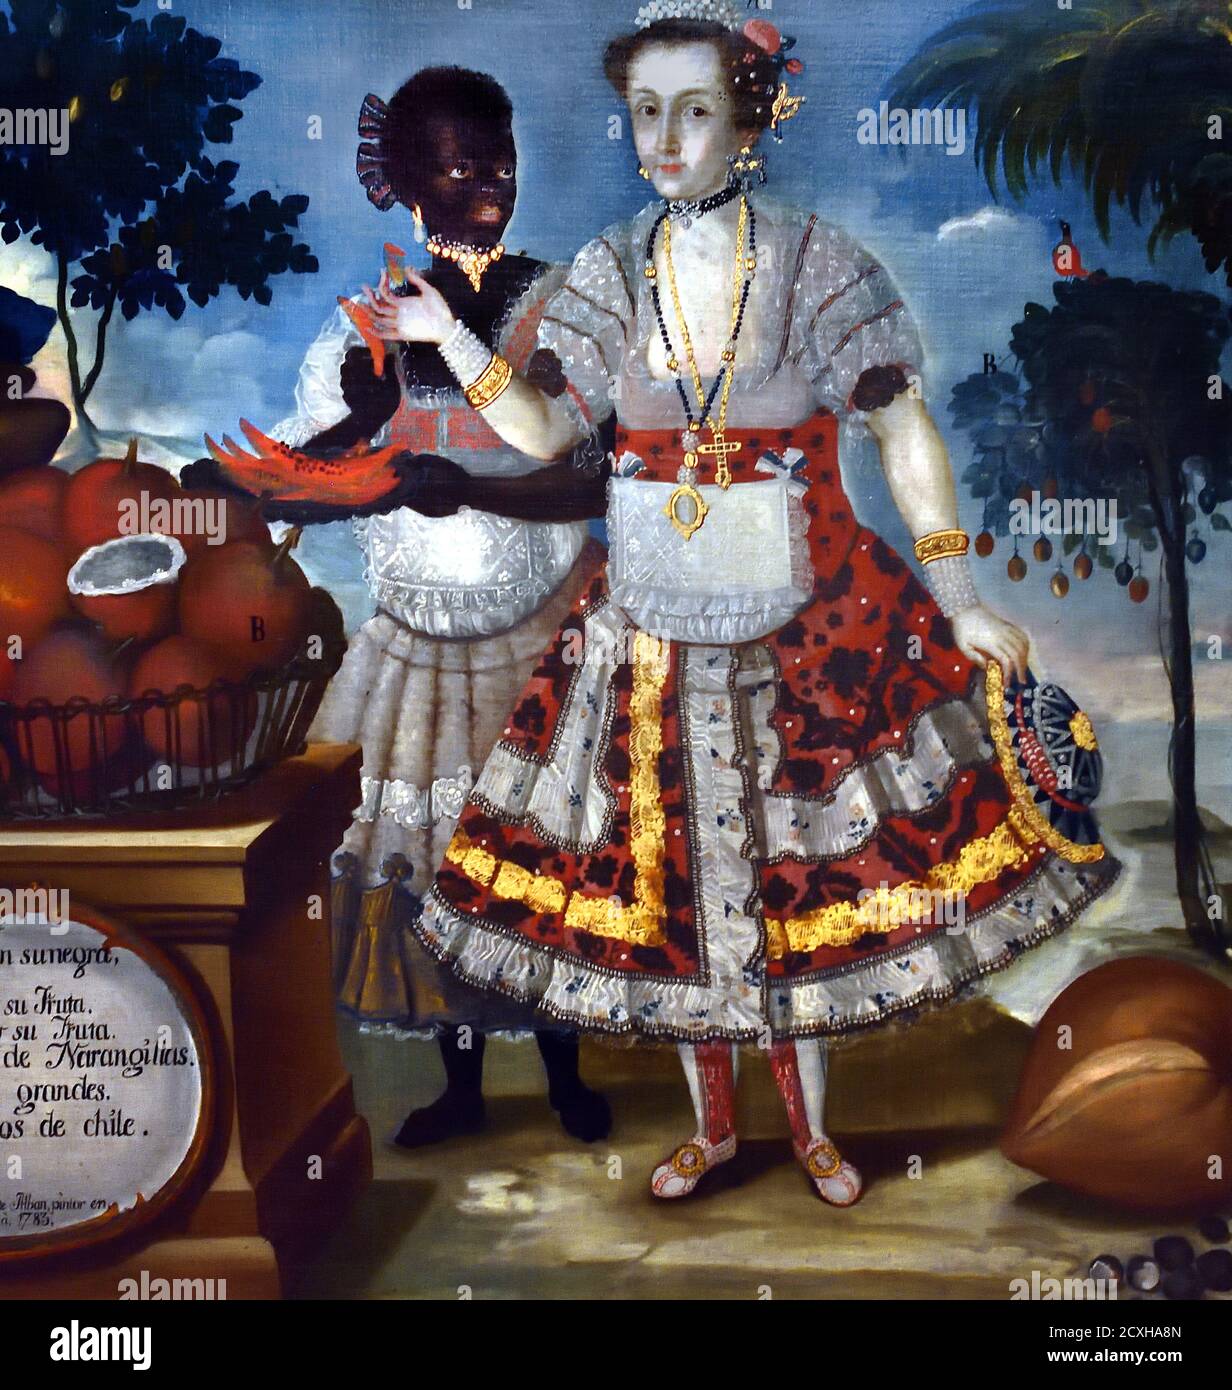 Spanish lady with her black woman slave by Vicente Albán 1783 America, American, ( In 1783 the Ecuadorian painter Vicente Albán painted representing human body types taken from local society. Dressed and adorned in the fashion of the time in the Royal Audience of Quito  ) Vincente Albán born in 1725 in Quito, Ecuador  was an Ecuadorian painter of indigenous (Yumbo people) and Hispanic Criollos in their native outfits', Ecuador, Stock Photo